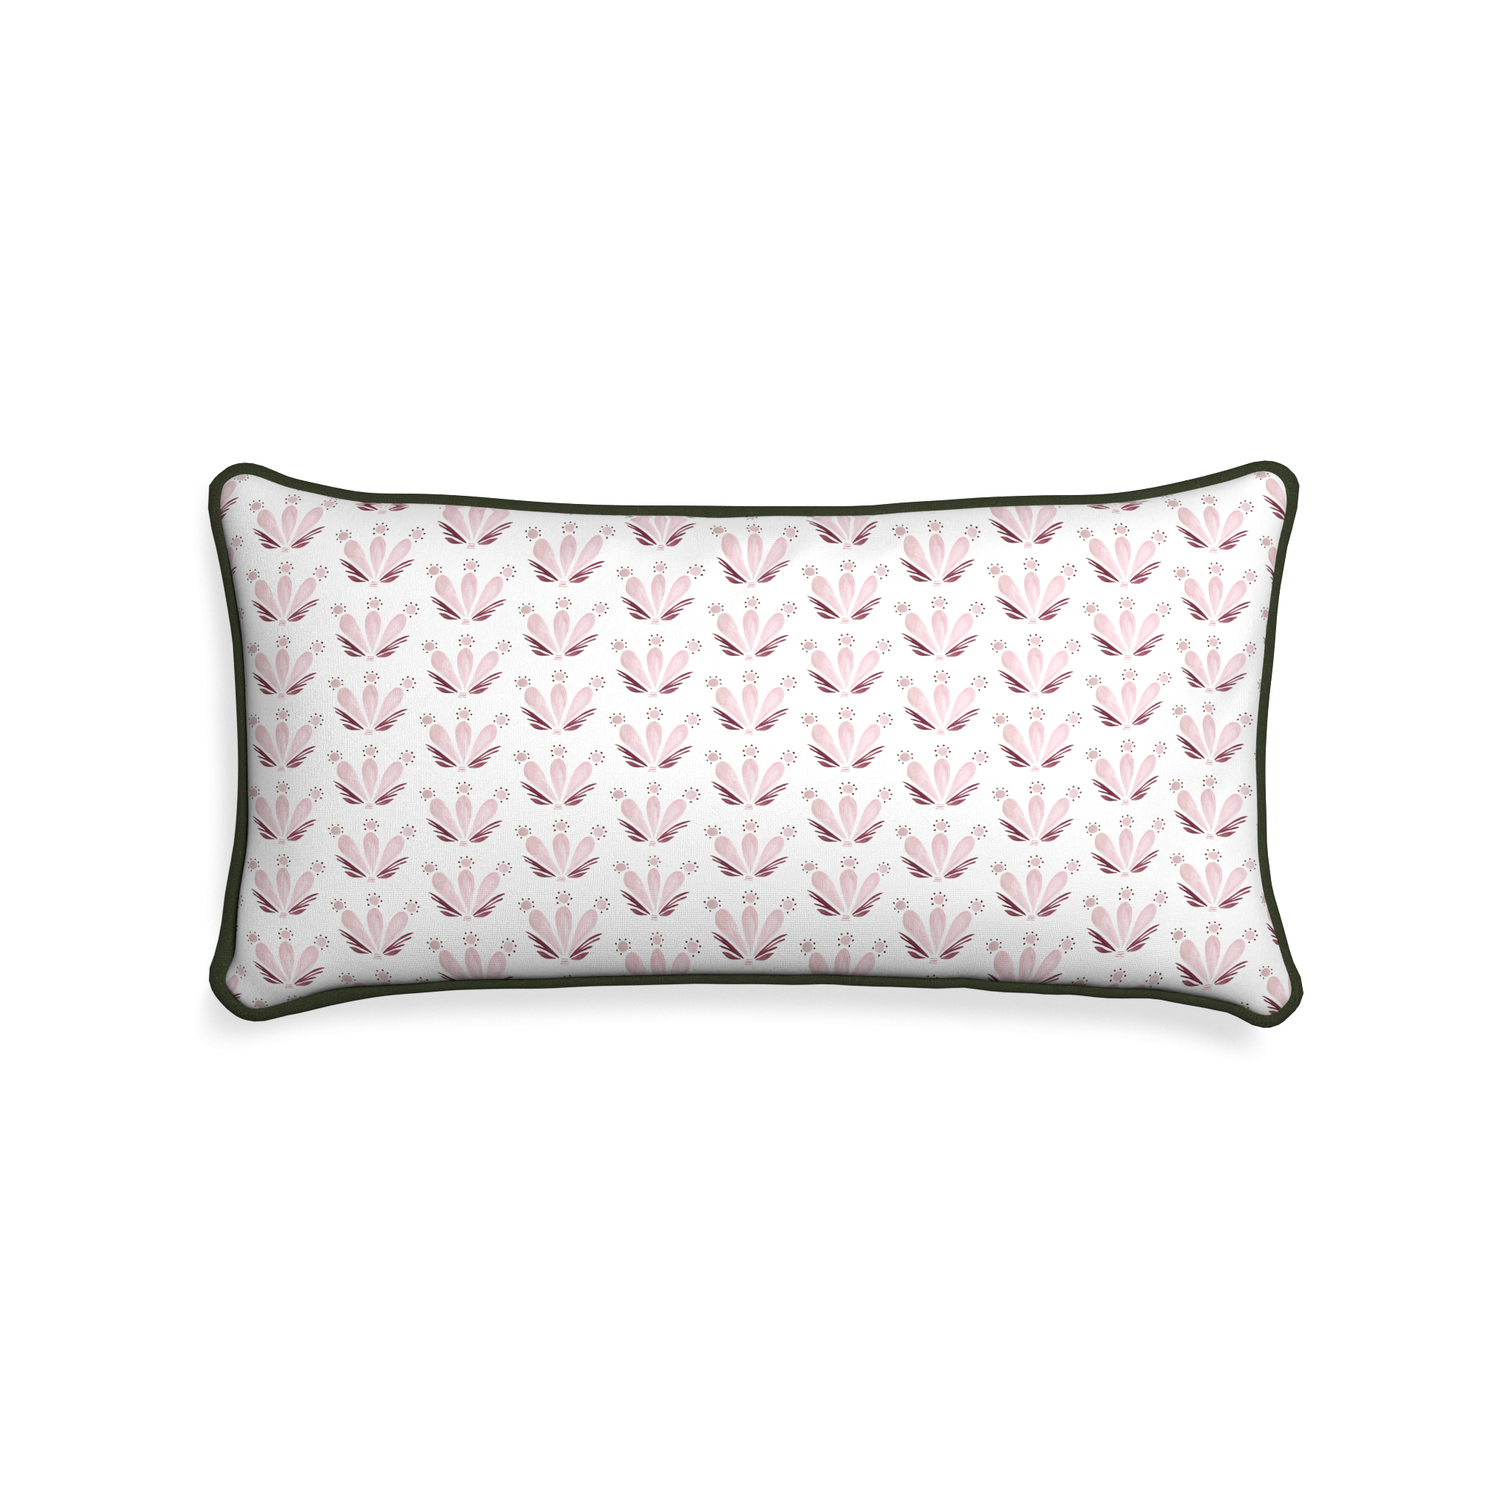 Midi-lumbar serena pink custom pink & burgundy drop repeat floralpillow with f piping on white background